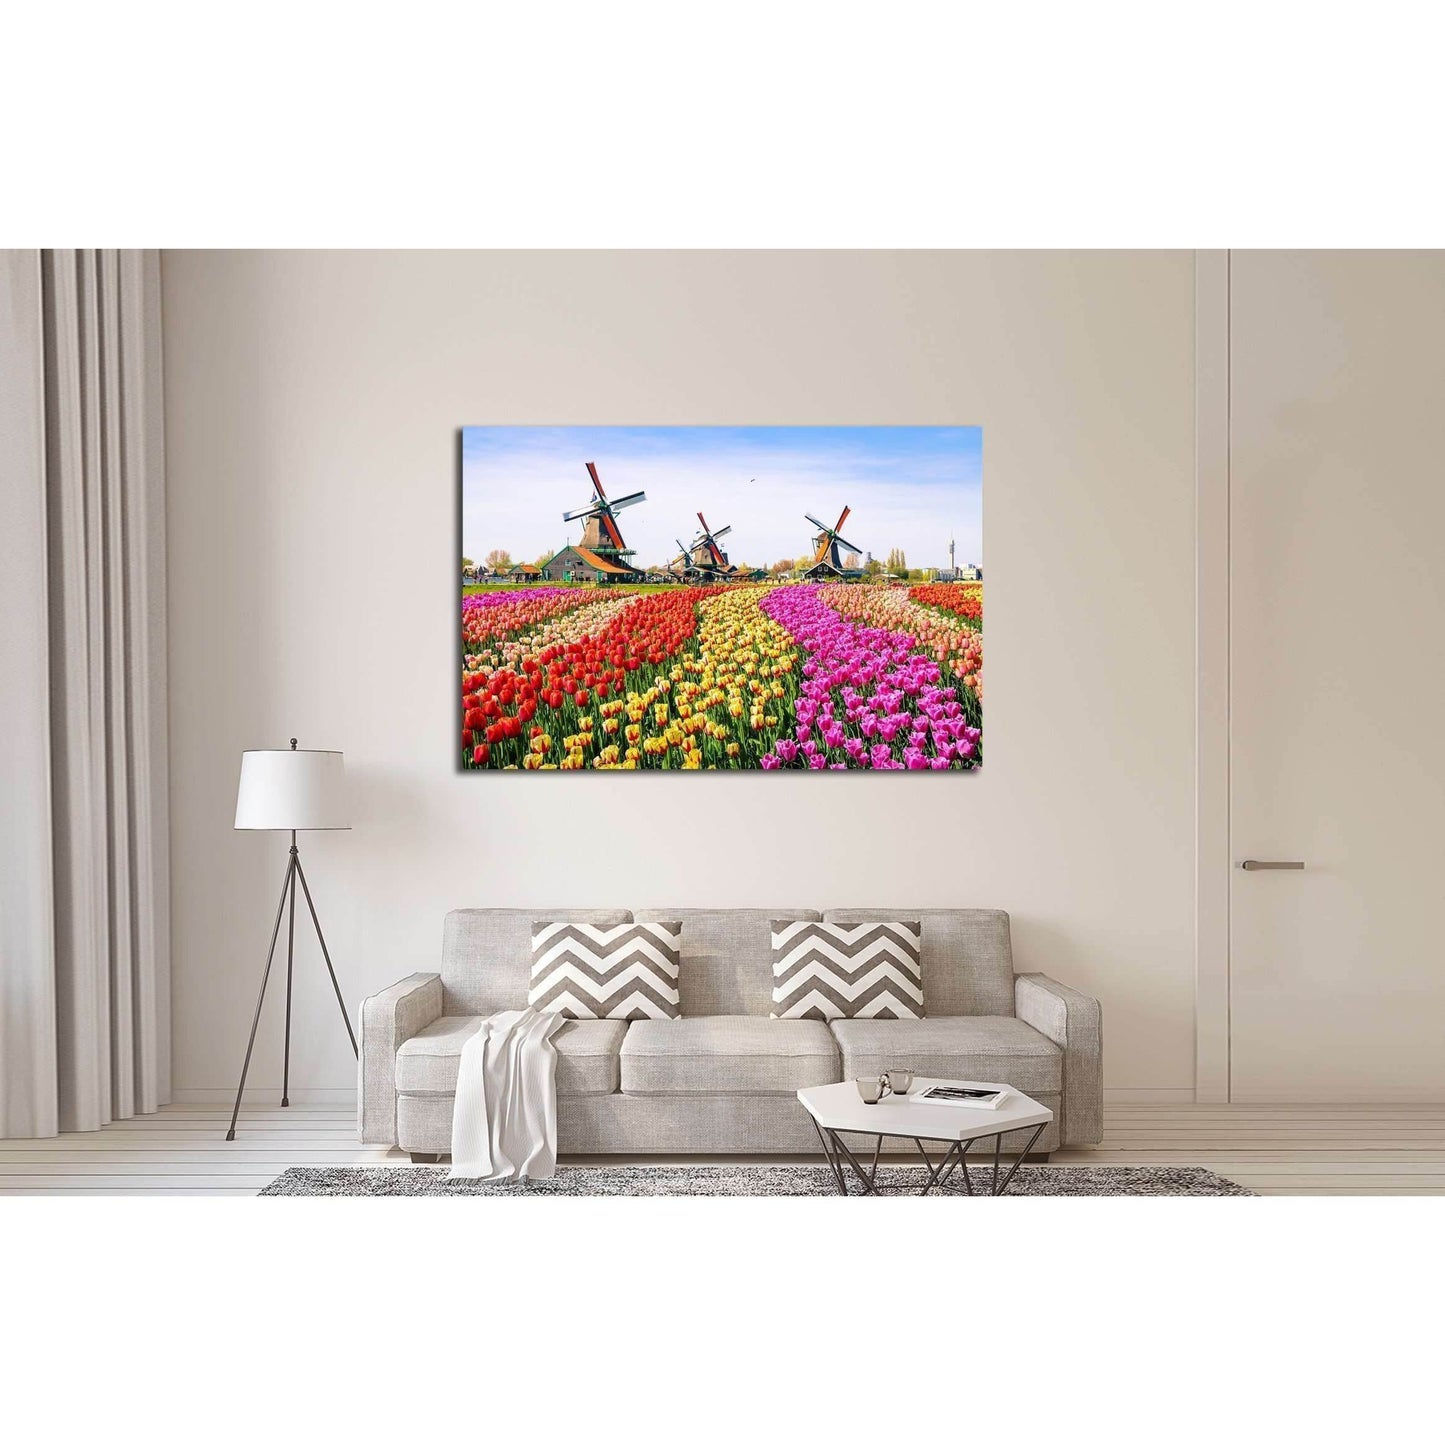 Zaanse Schans Windmills and Tulip Fields Canvas for Vibrant DecorThis canvas print vividly portrays the charming Zaanse Schans with its iconic windmills standing tall above a vibrant field of tulips in the Netherlands. The array of colors and the historic